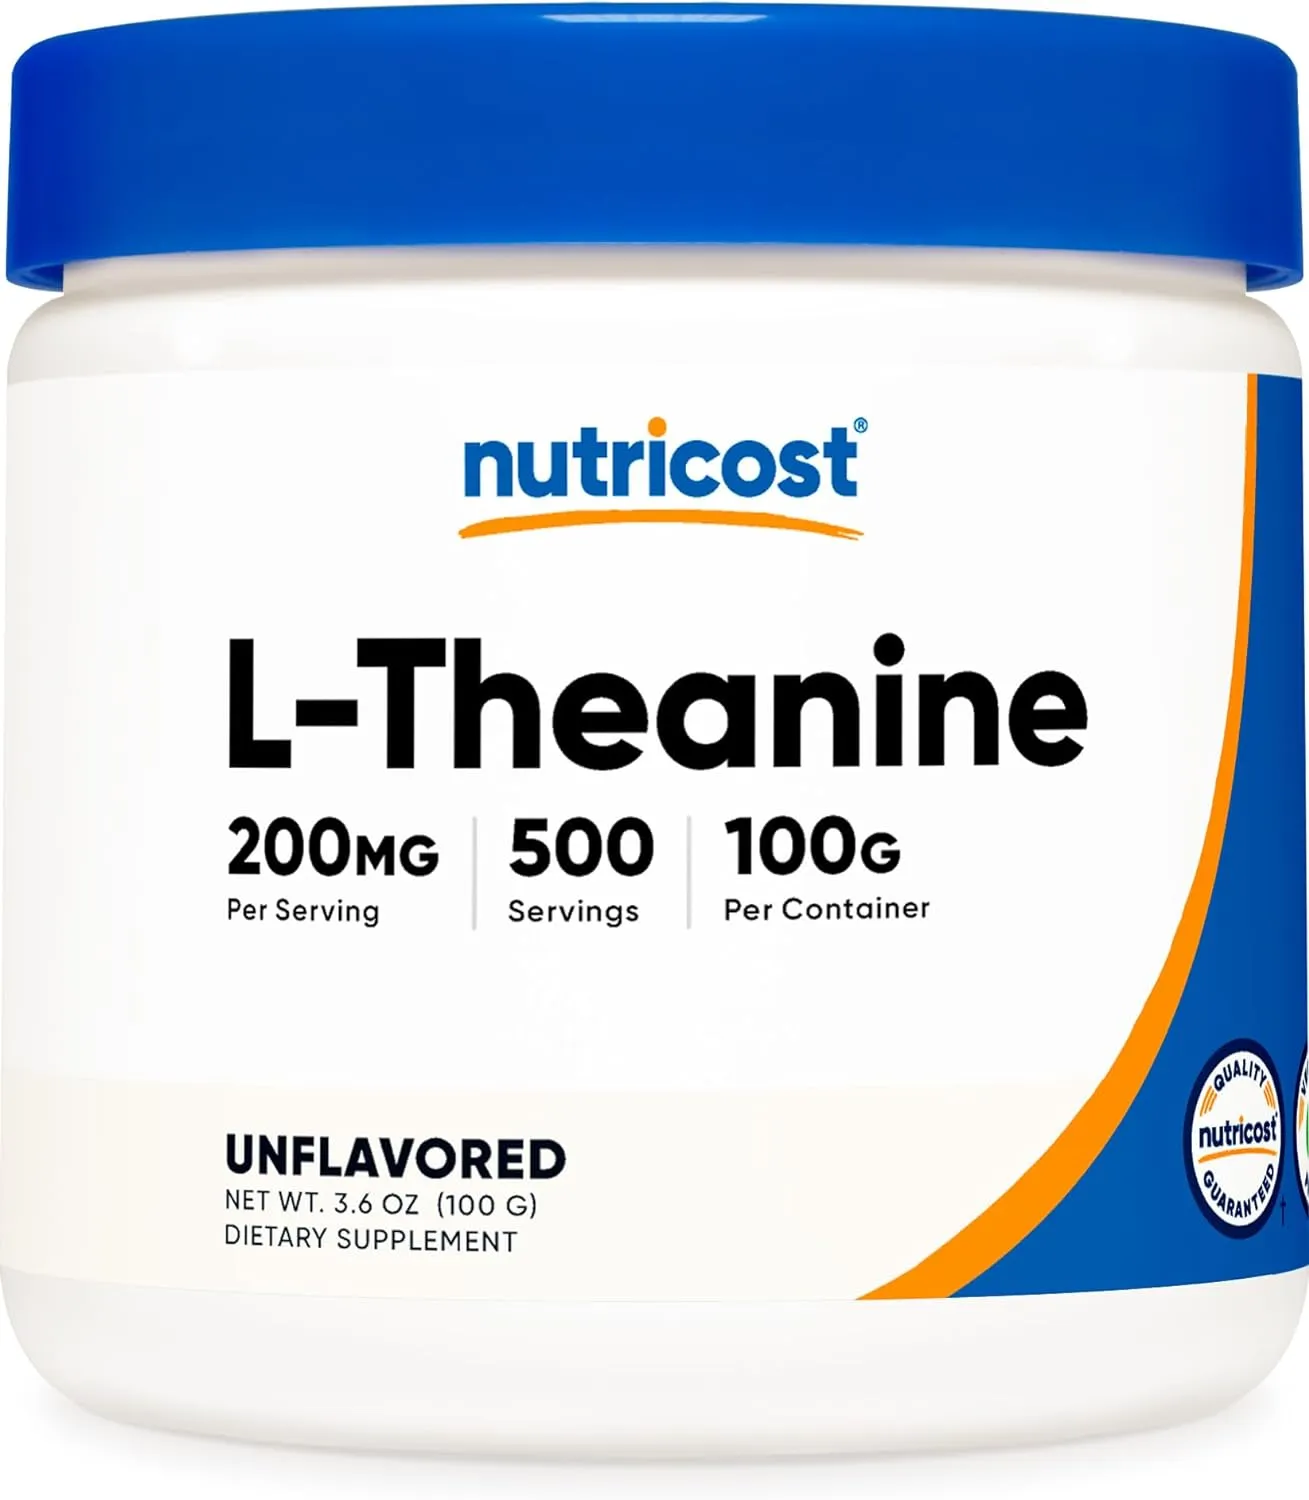 Nutricost L-theanine 200mg Sin Sabor 100g